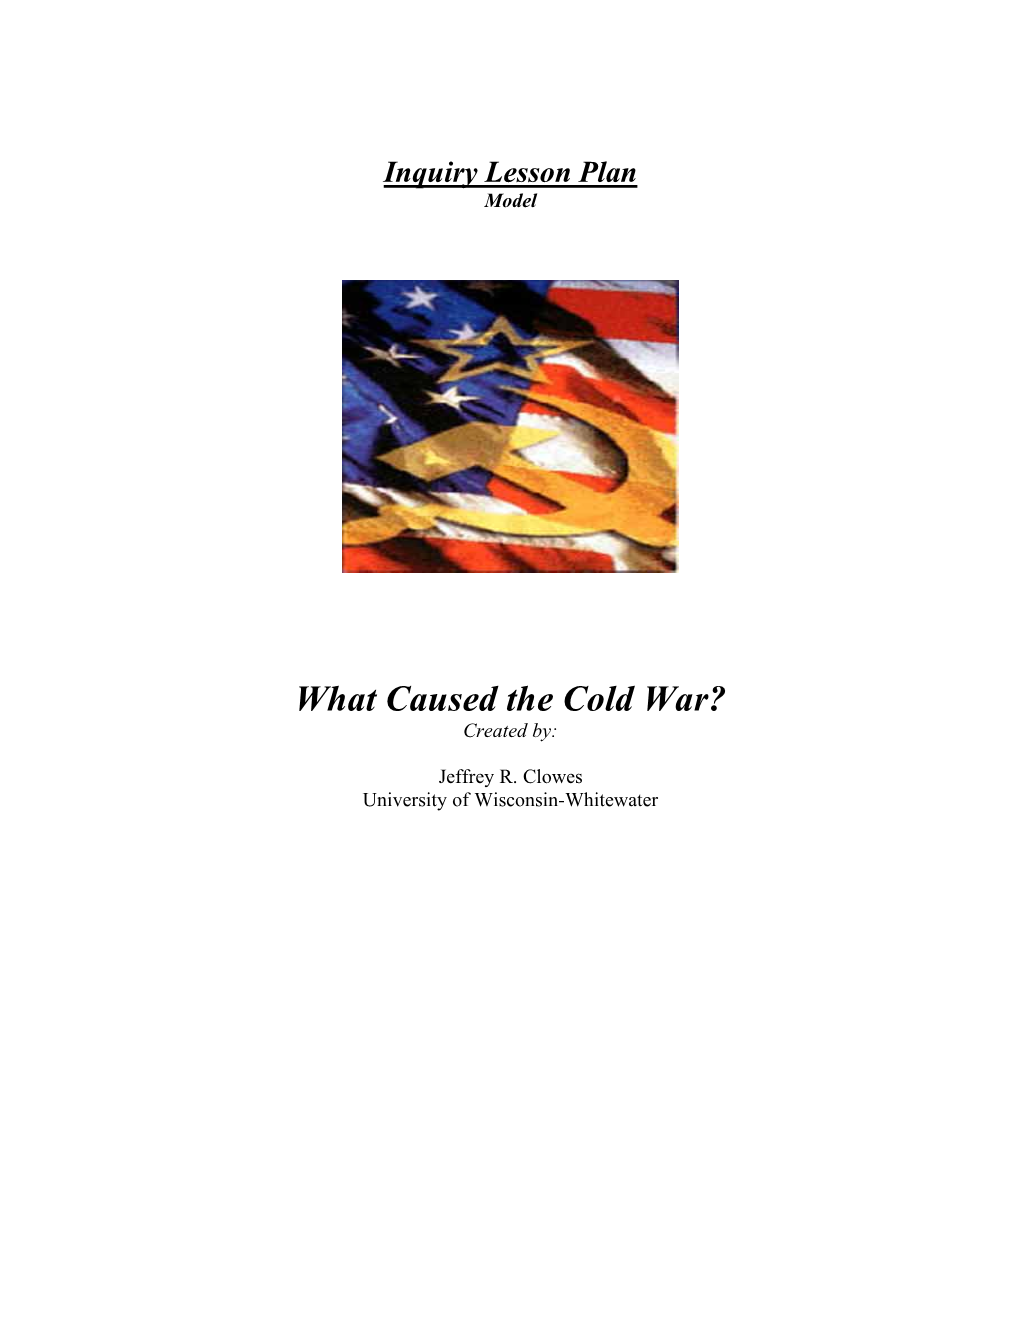 What Caused the Cold War? Created By